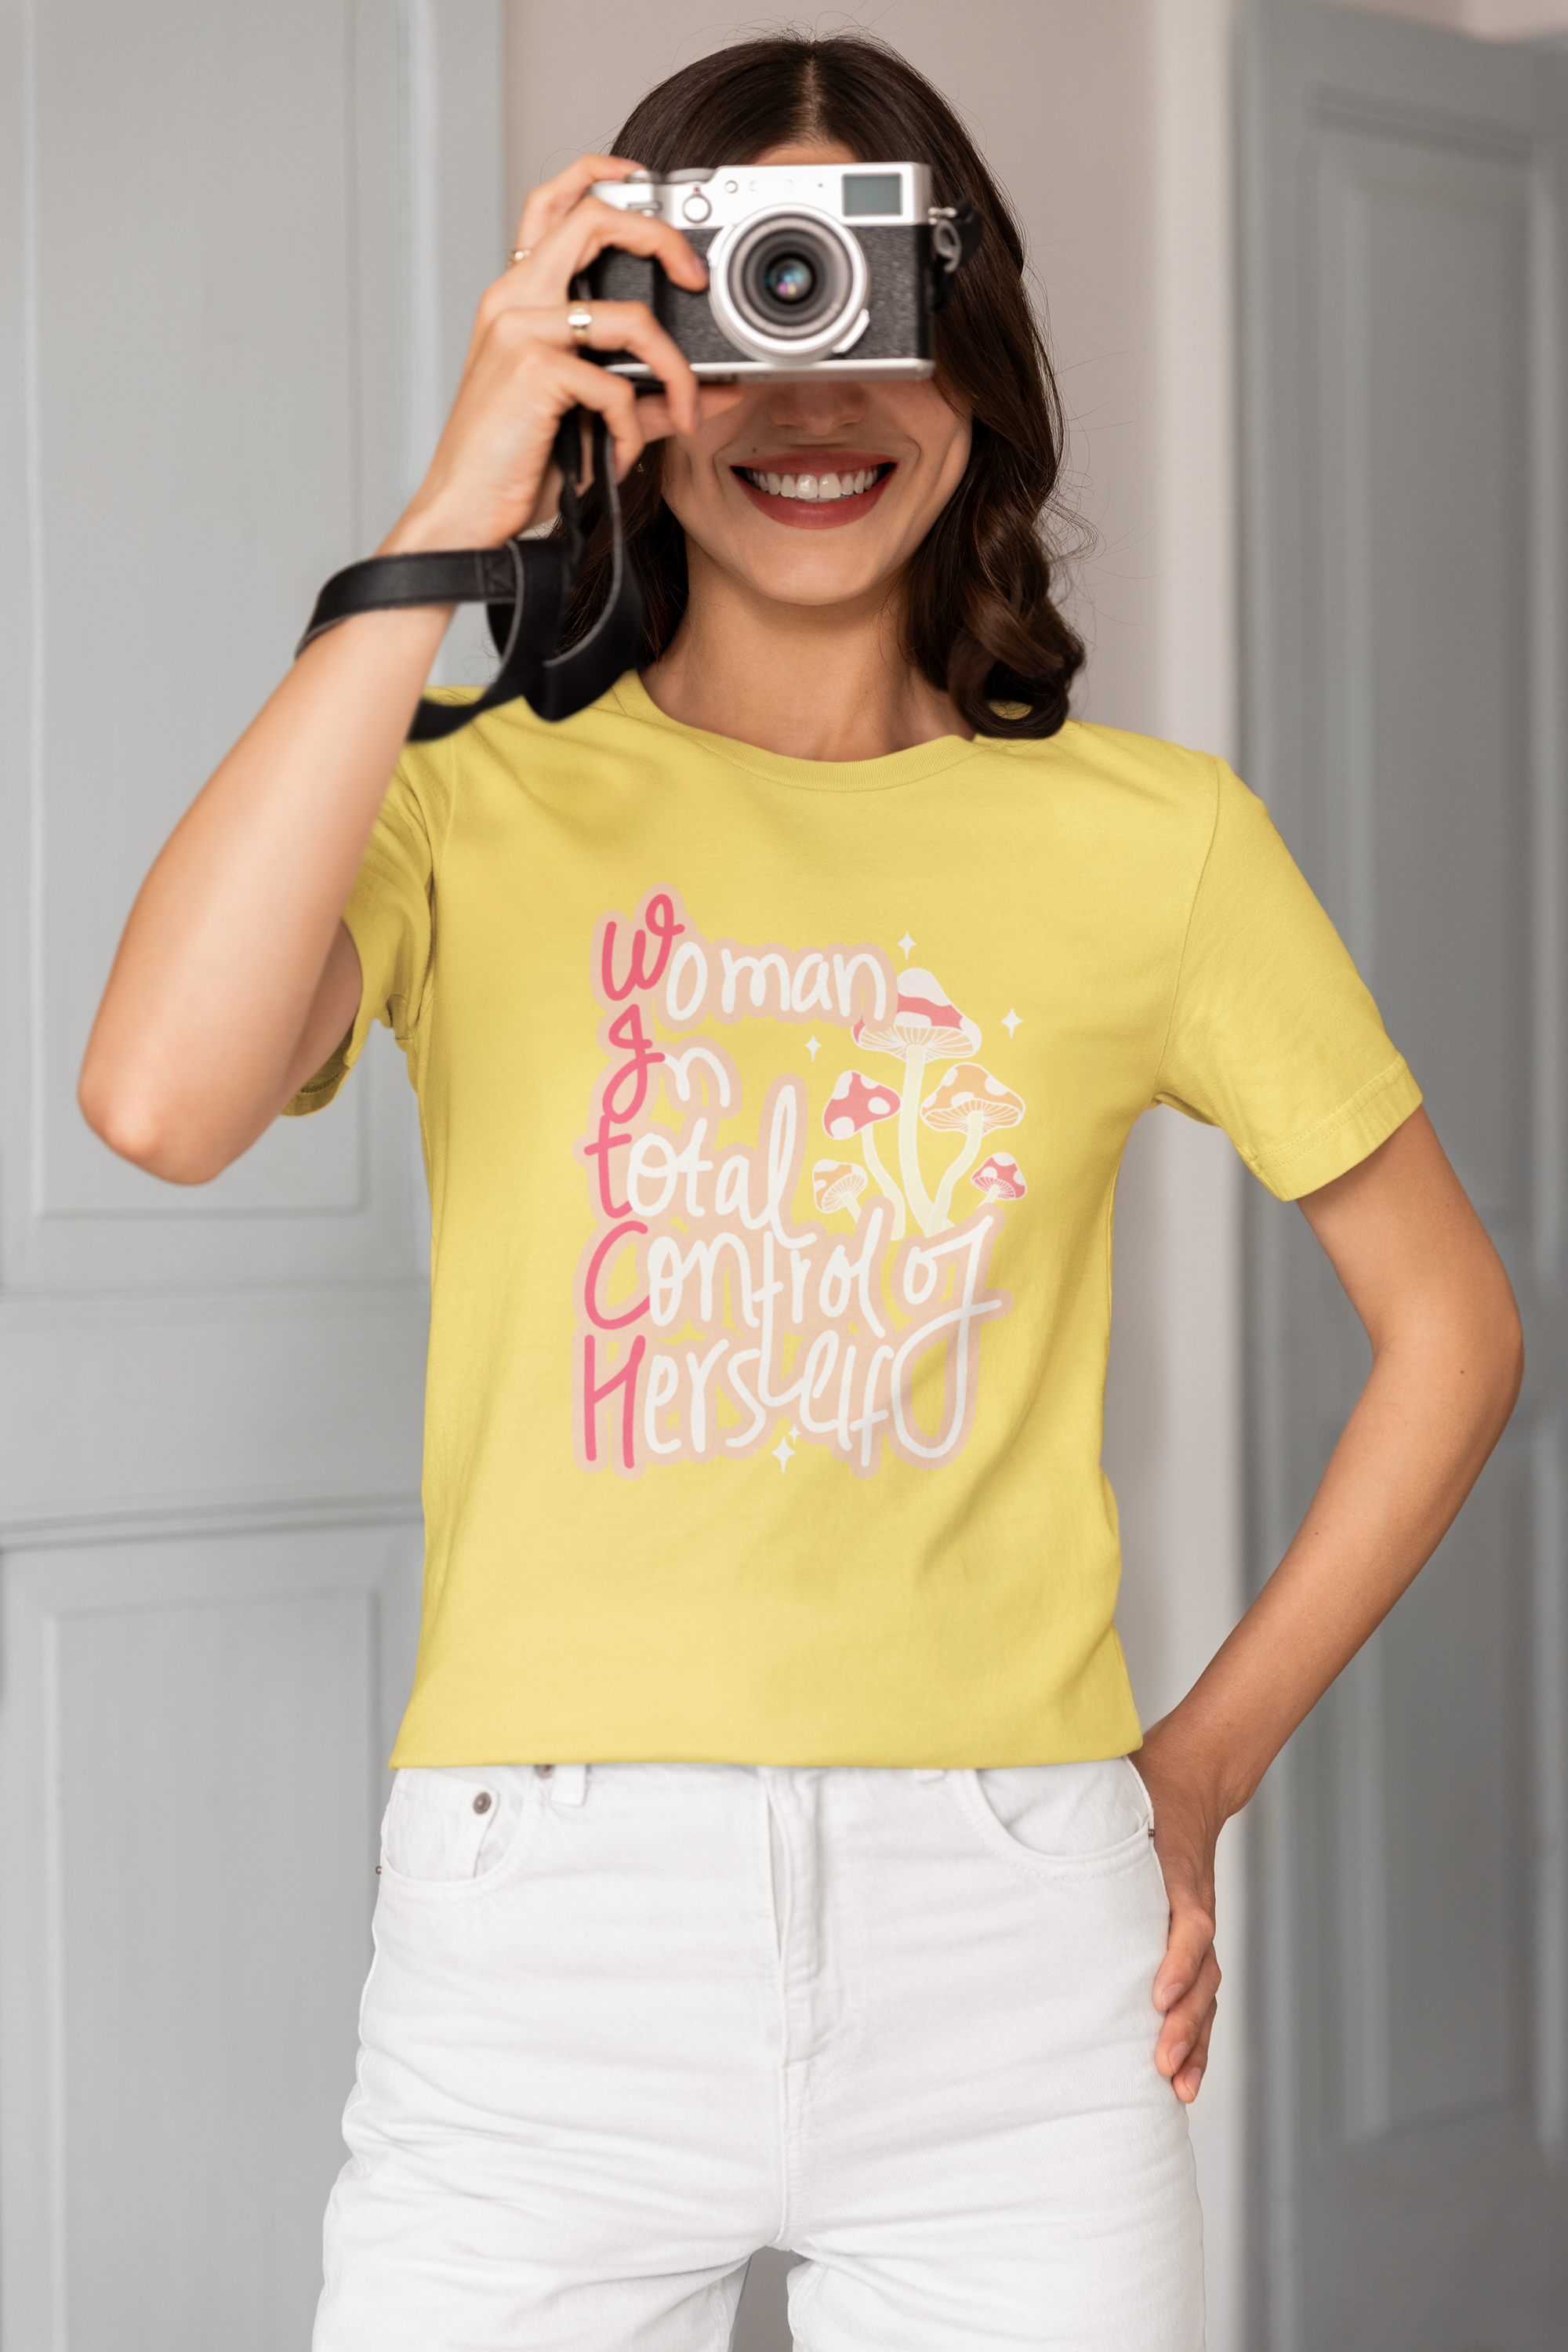 Witch: Women In Total Control of Herself- Regular Fit Tees- 180 GSM